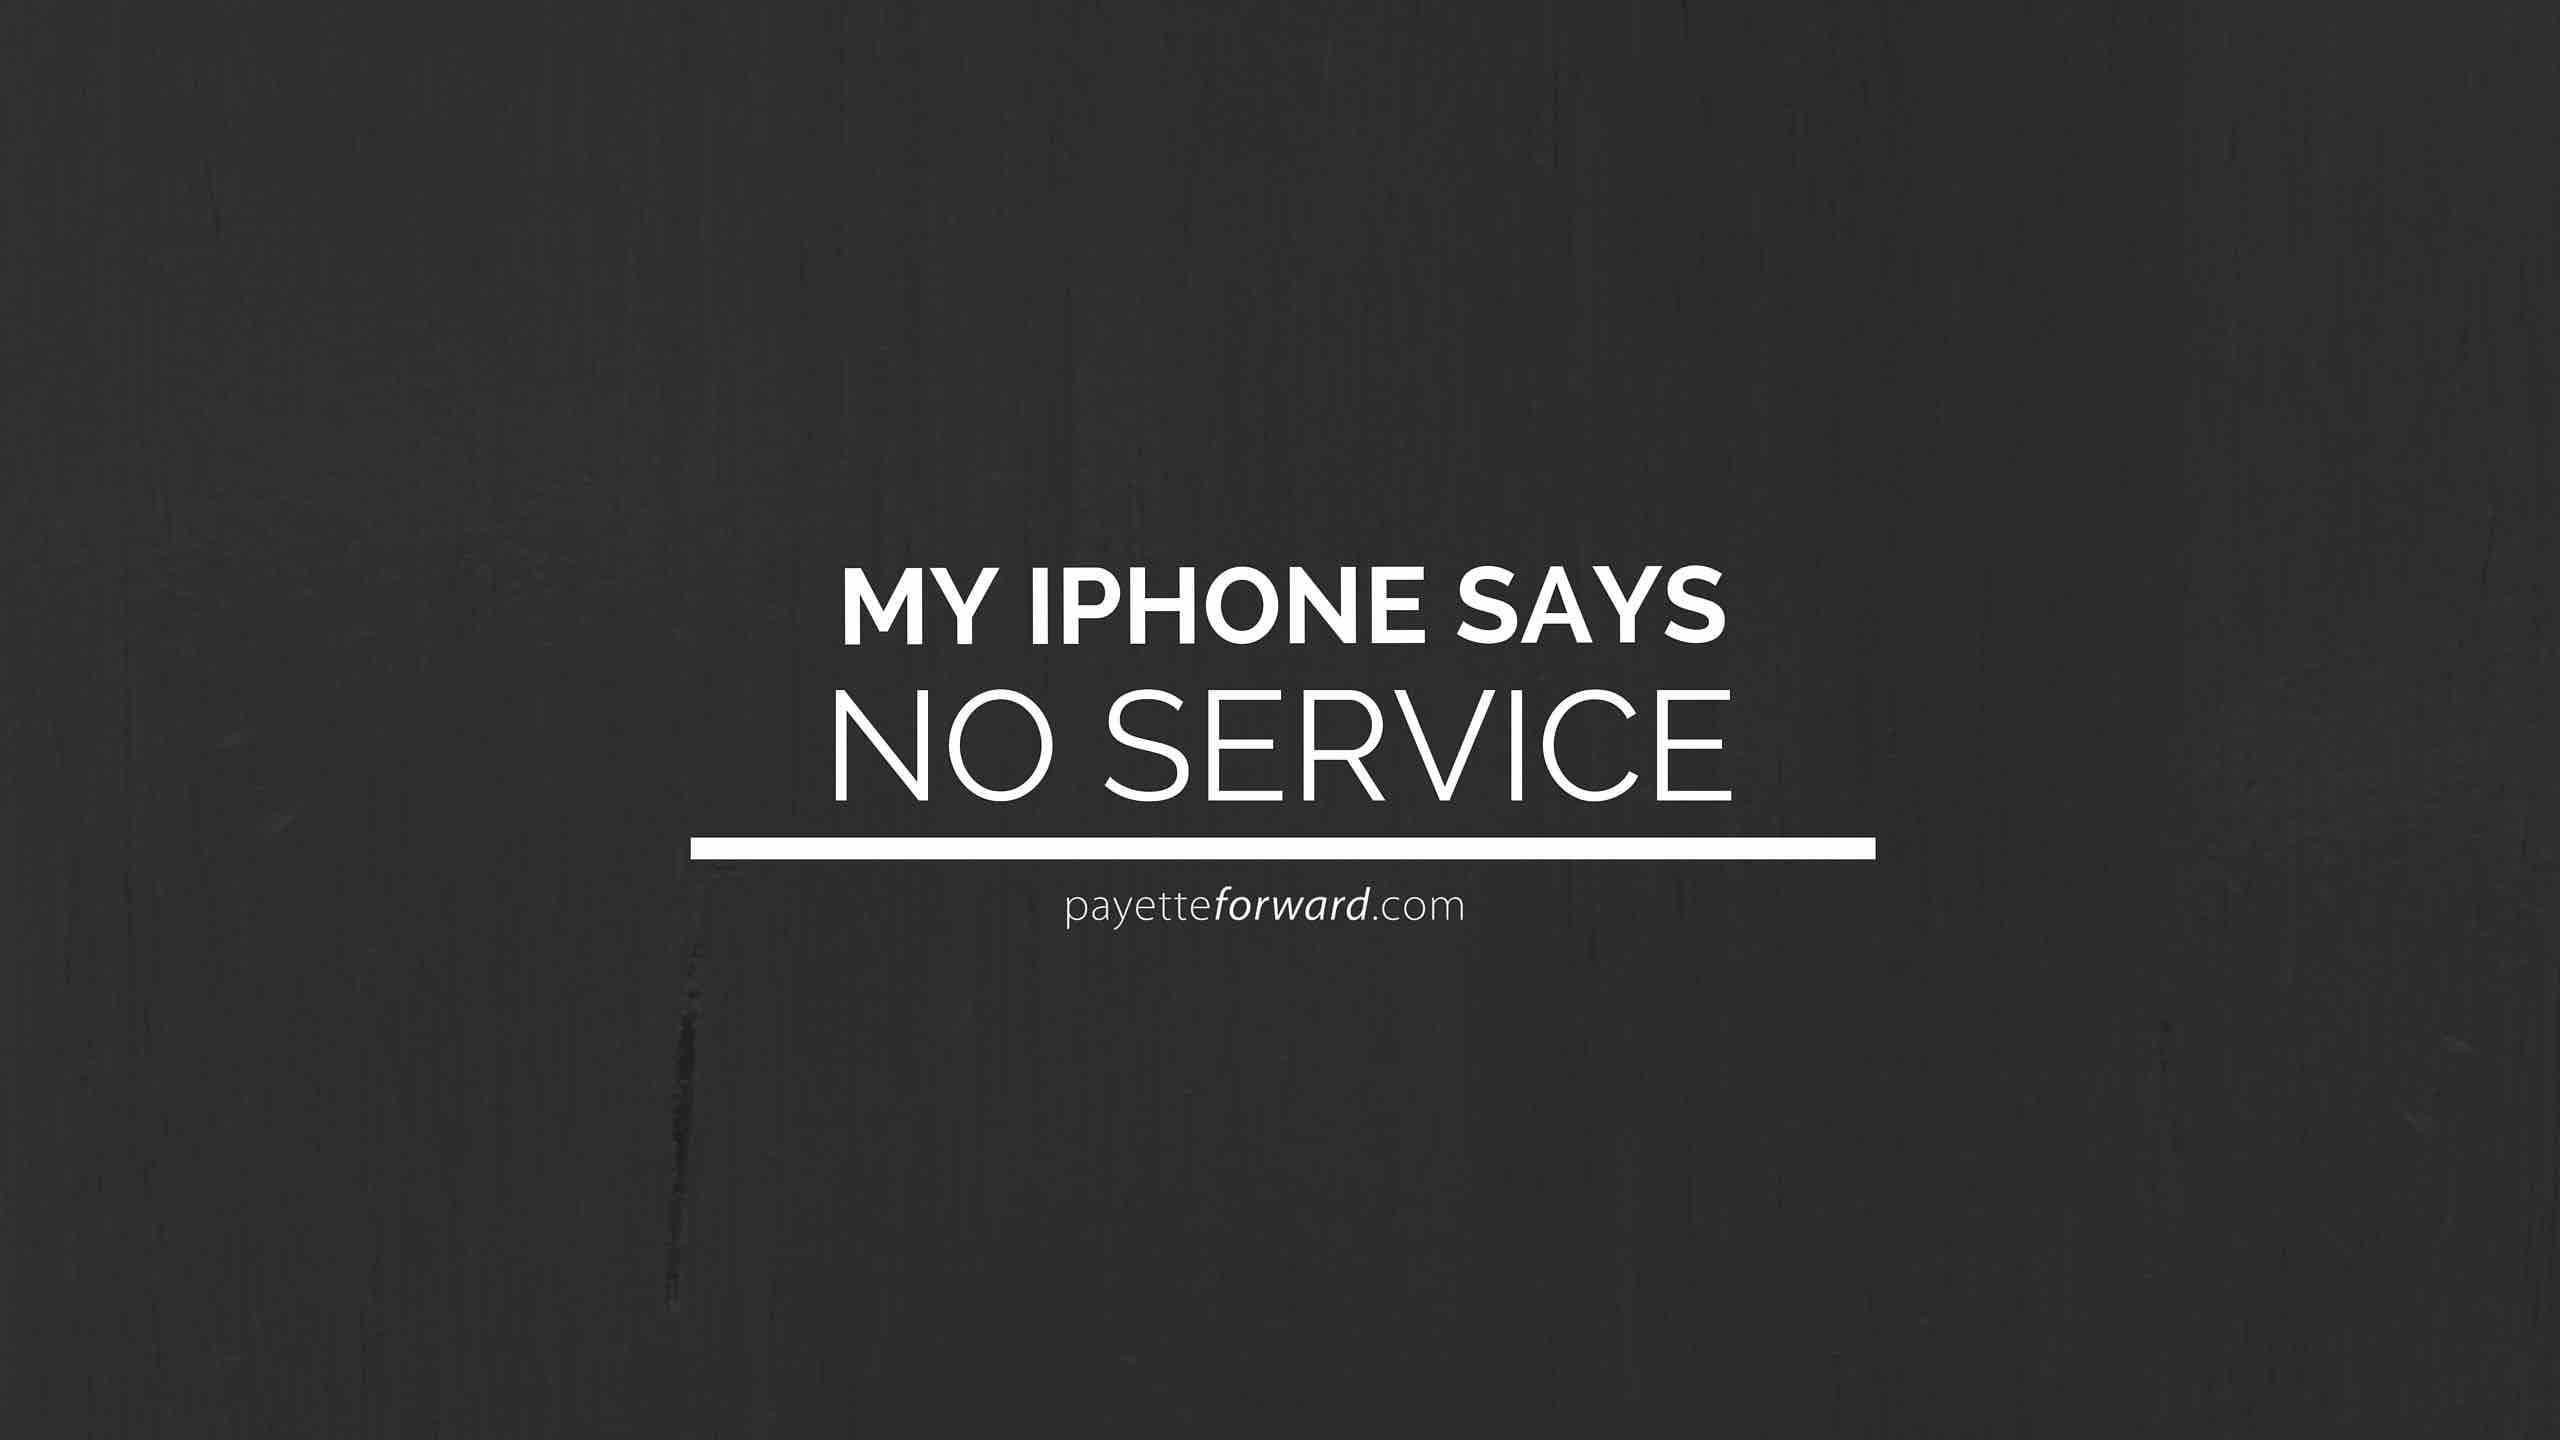 My iPhone Says No Service. Here's The Real Fix!